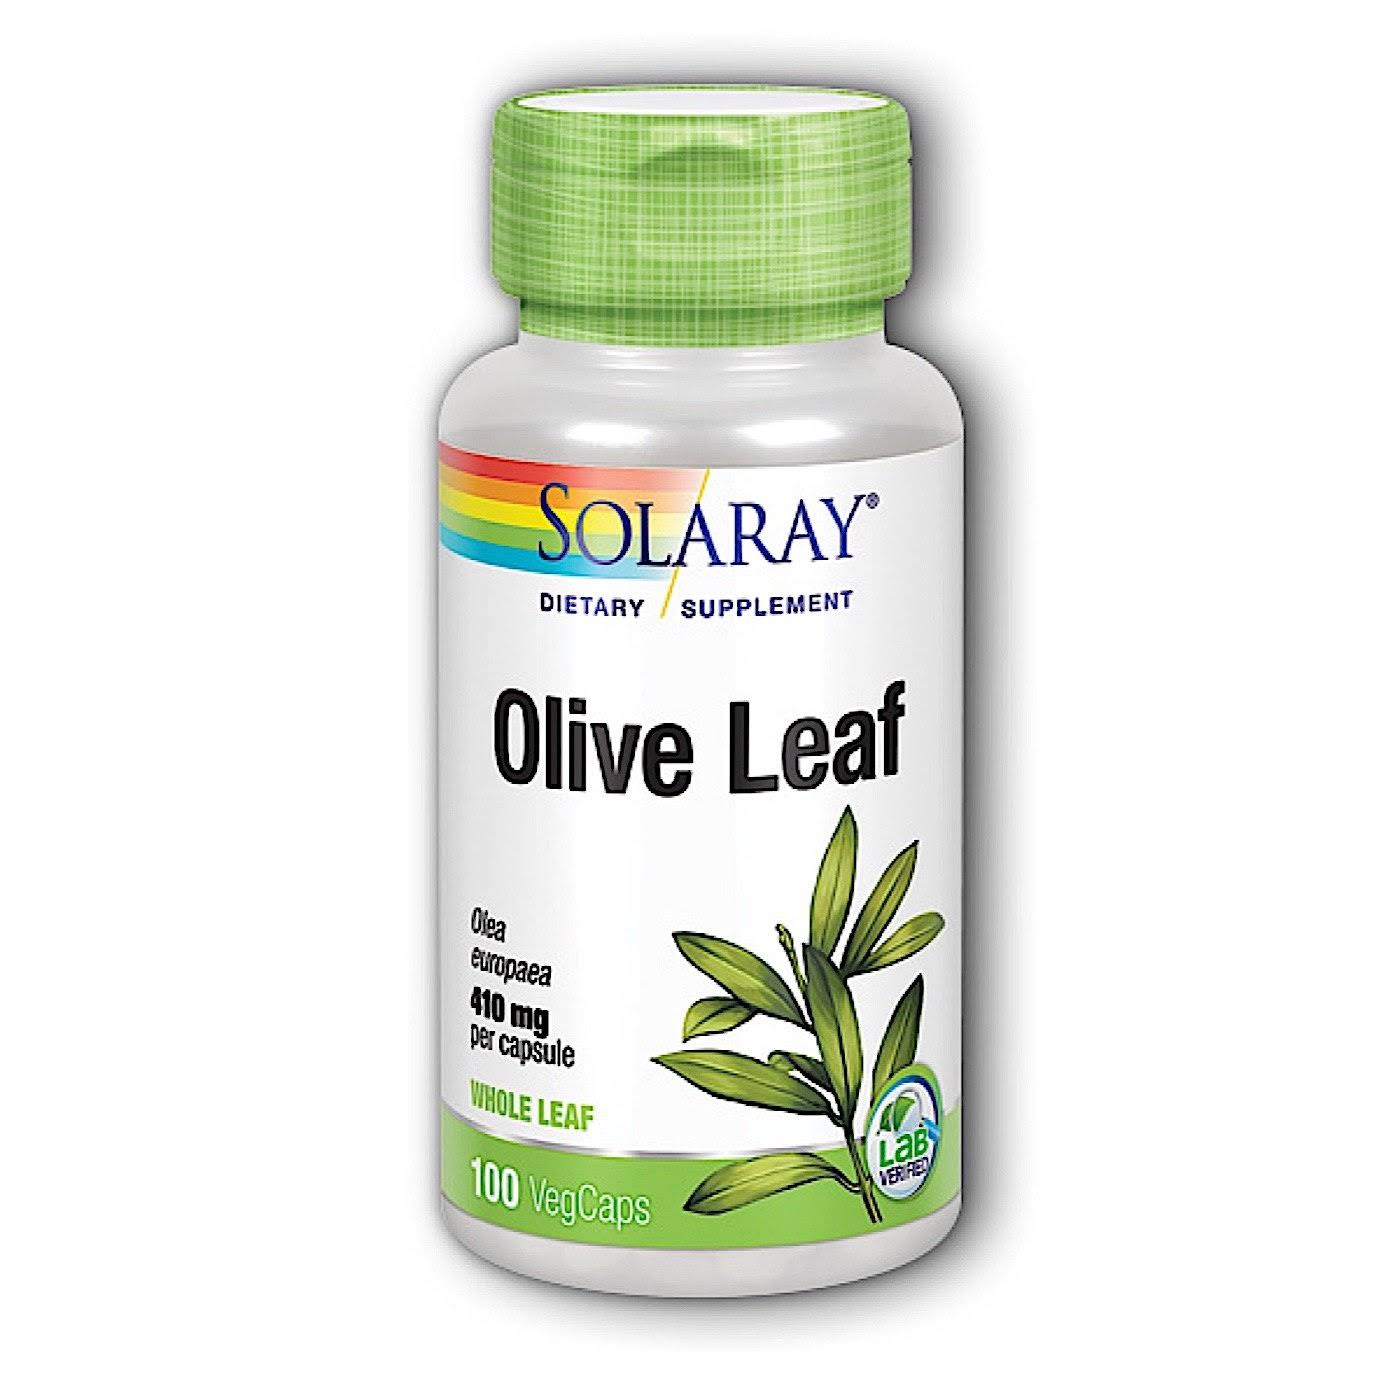 Solaray Olive Leaf Supplement - 410mg, 100ct